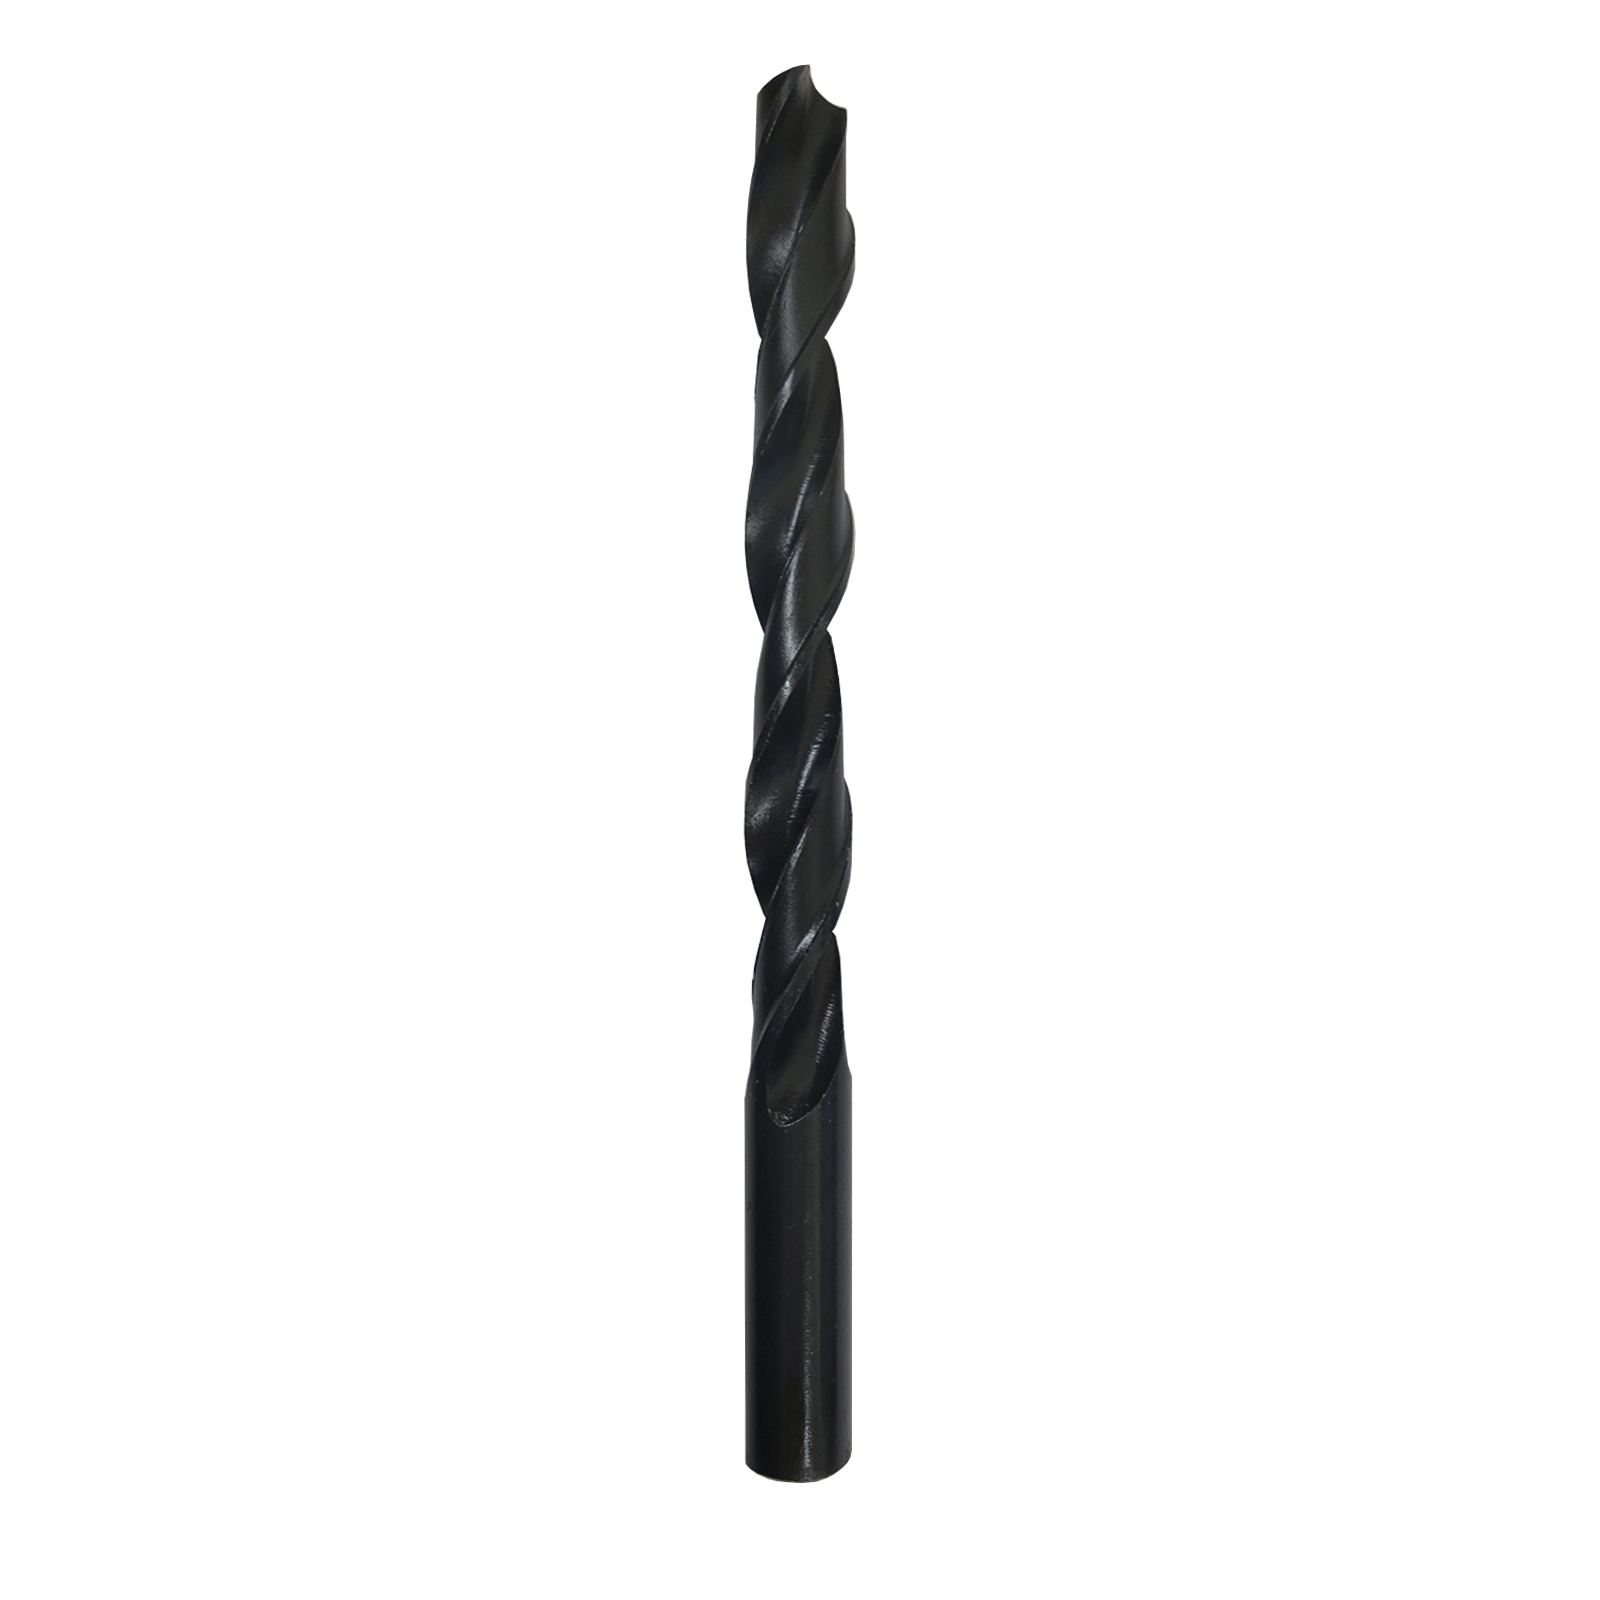 Gyros 45-42104 Premium (Made in US) Industrial Grade HSS Black Oxide Metric Drill Bit, 8.6 mm, Pack of 6